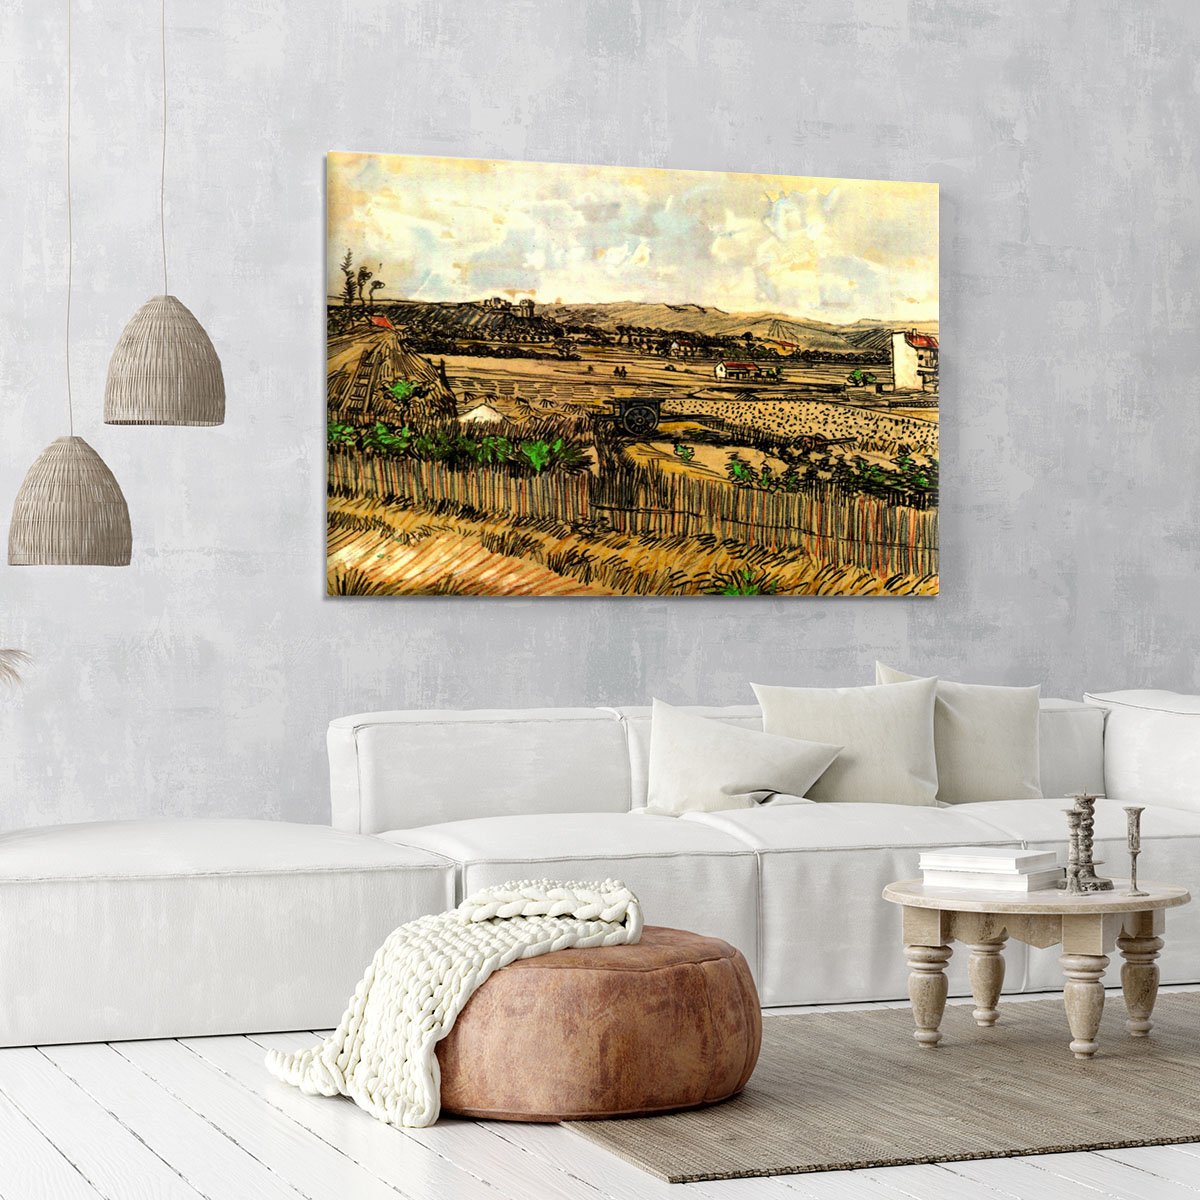 Harvest in Provence at the Left Montmajour by Van Gogh Canvas Print or Poster